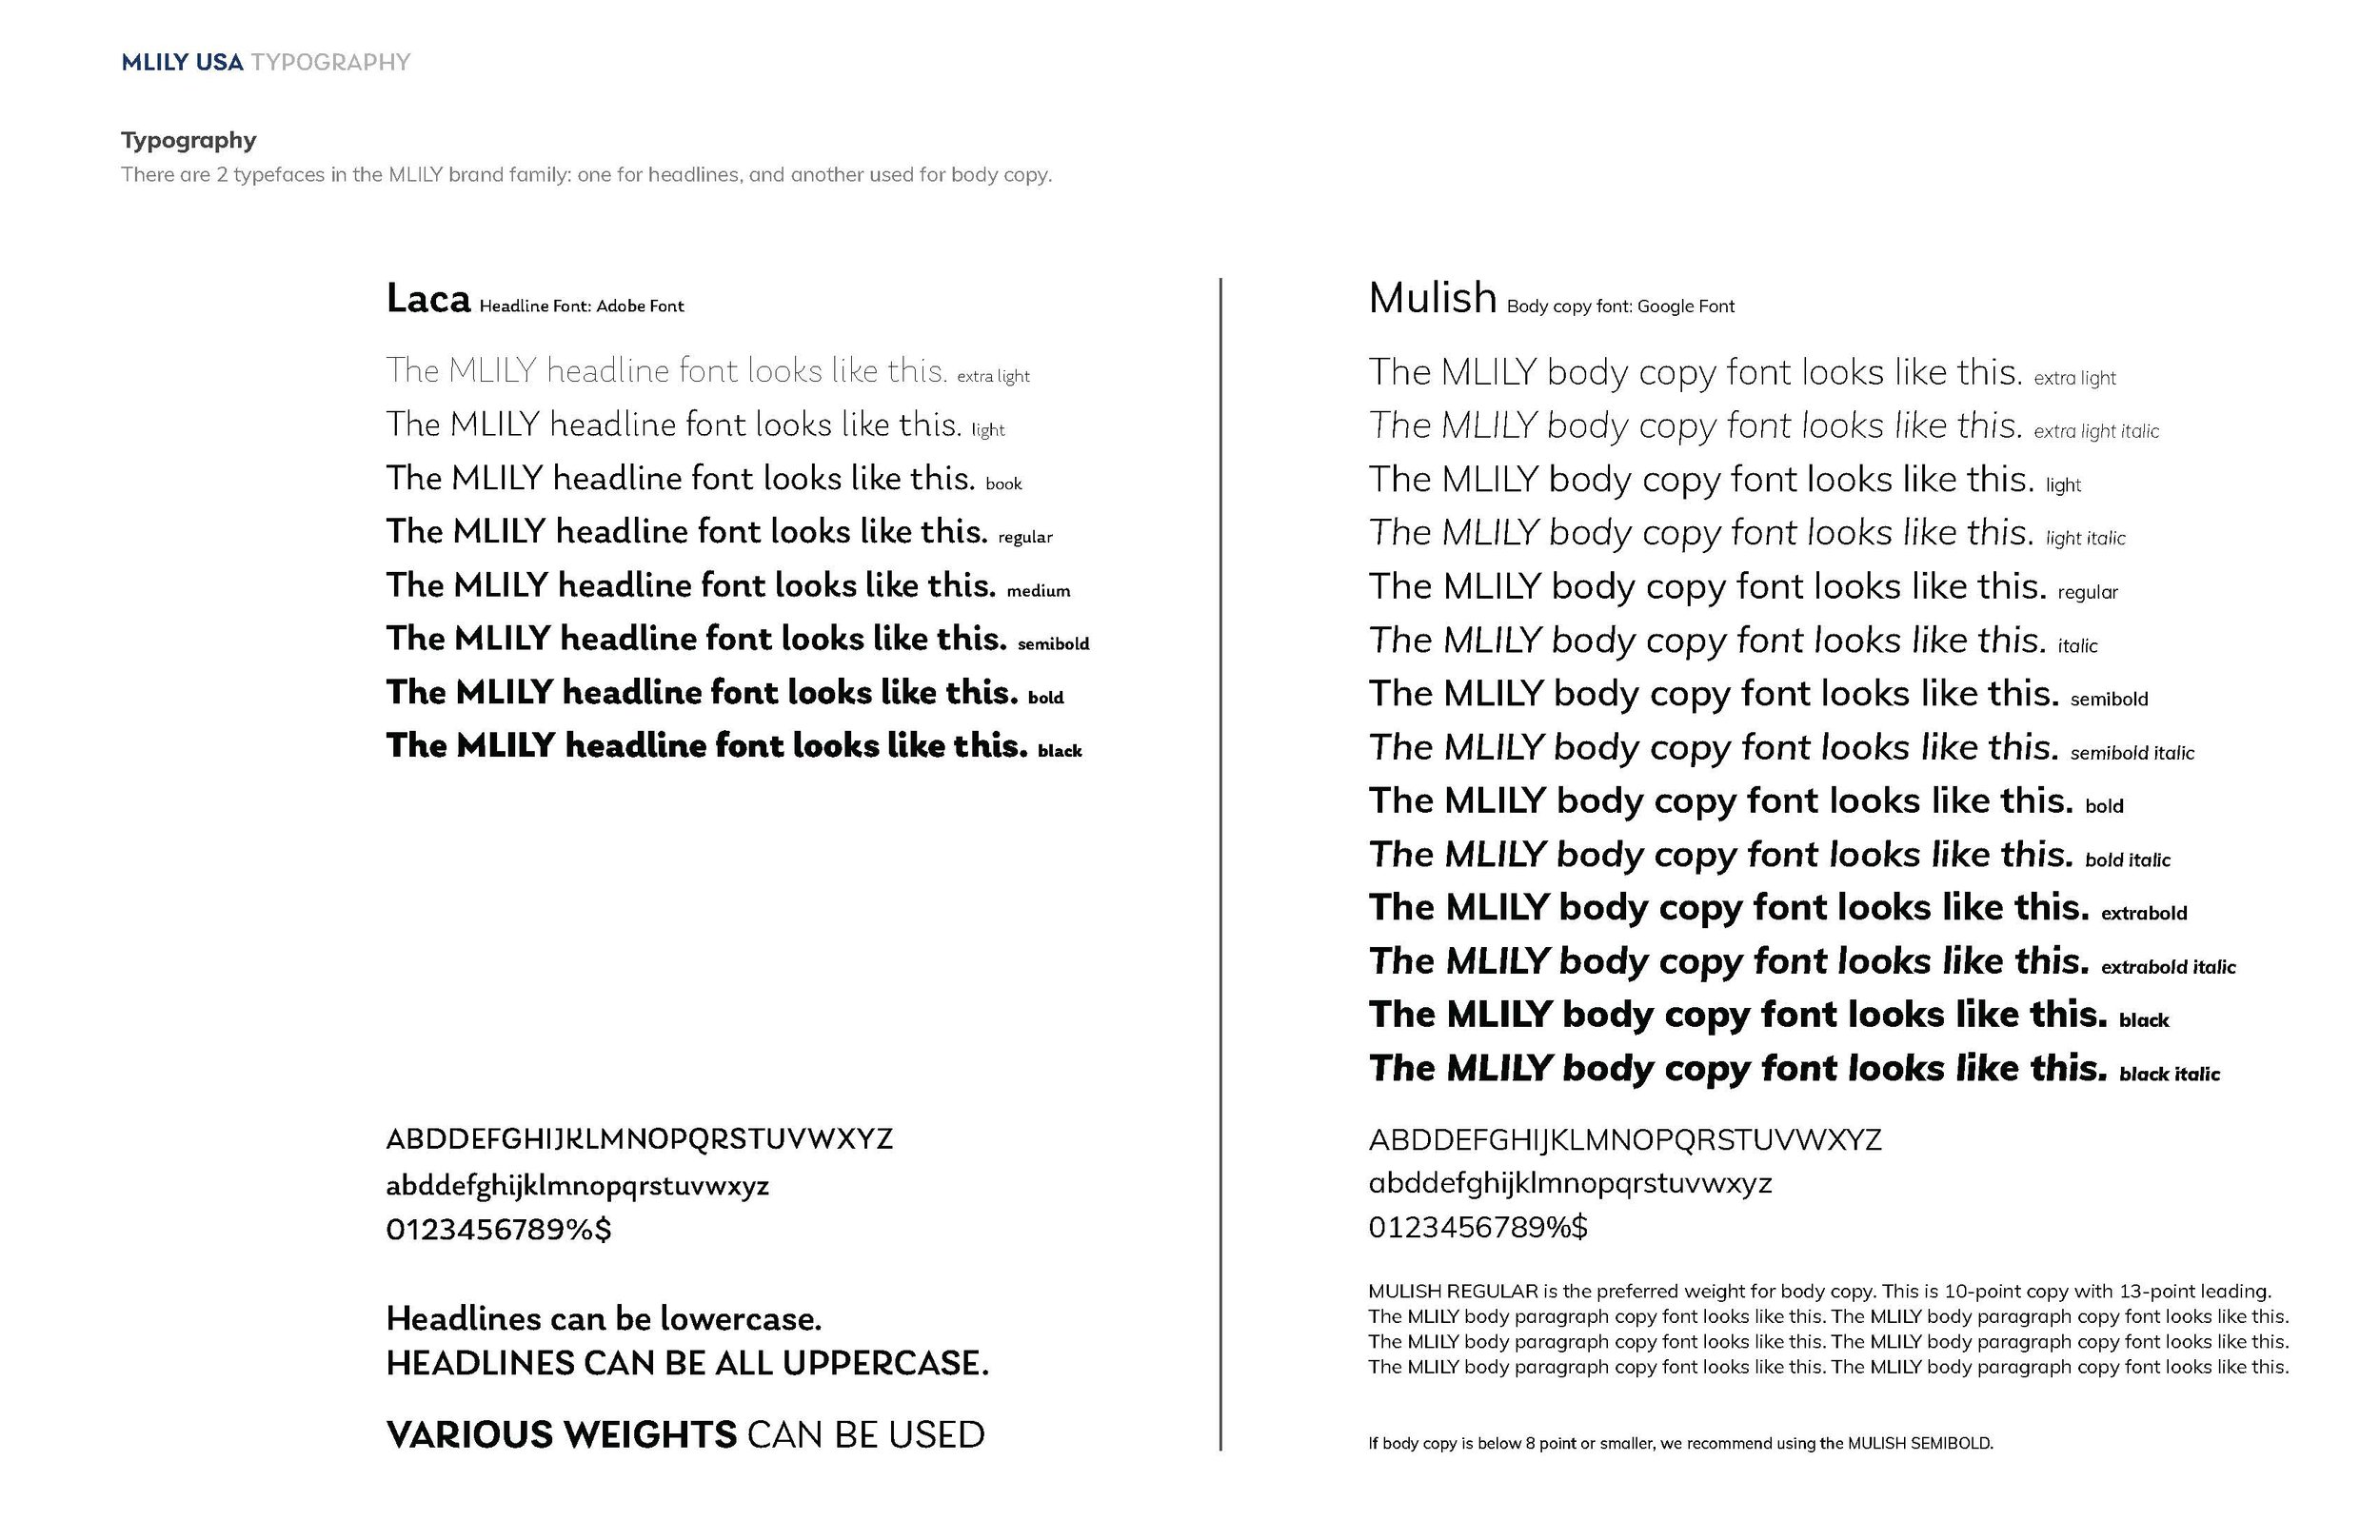 MLILY USA Brand Guidelines - with Pronunciation_Page_07.jpg